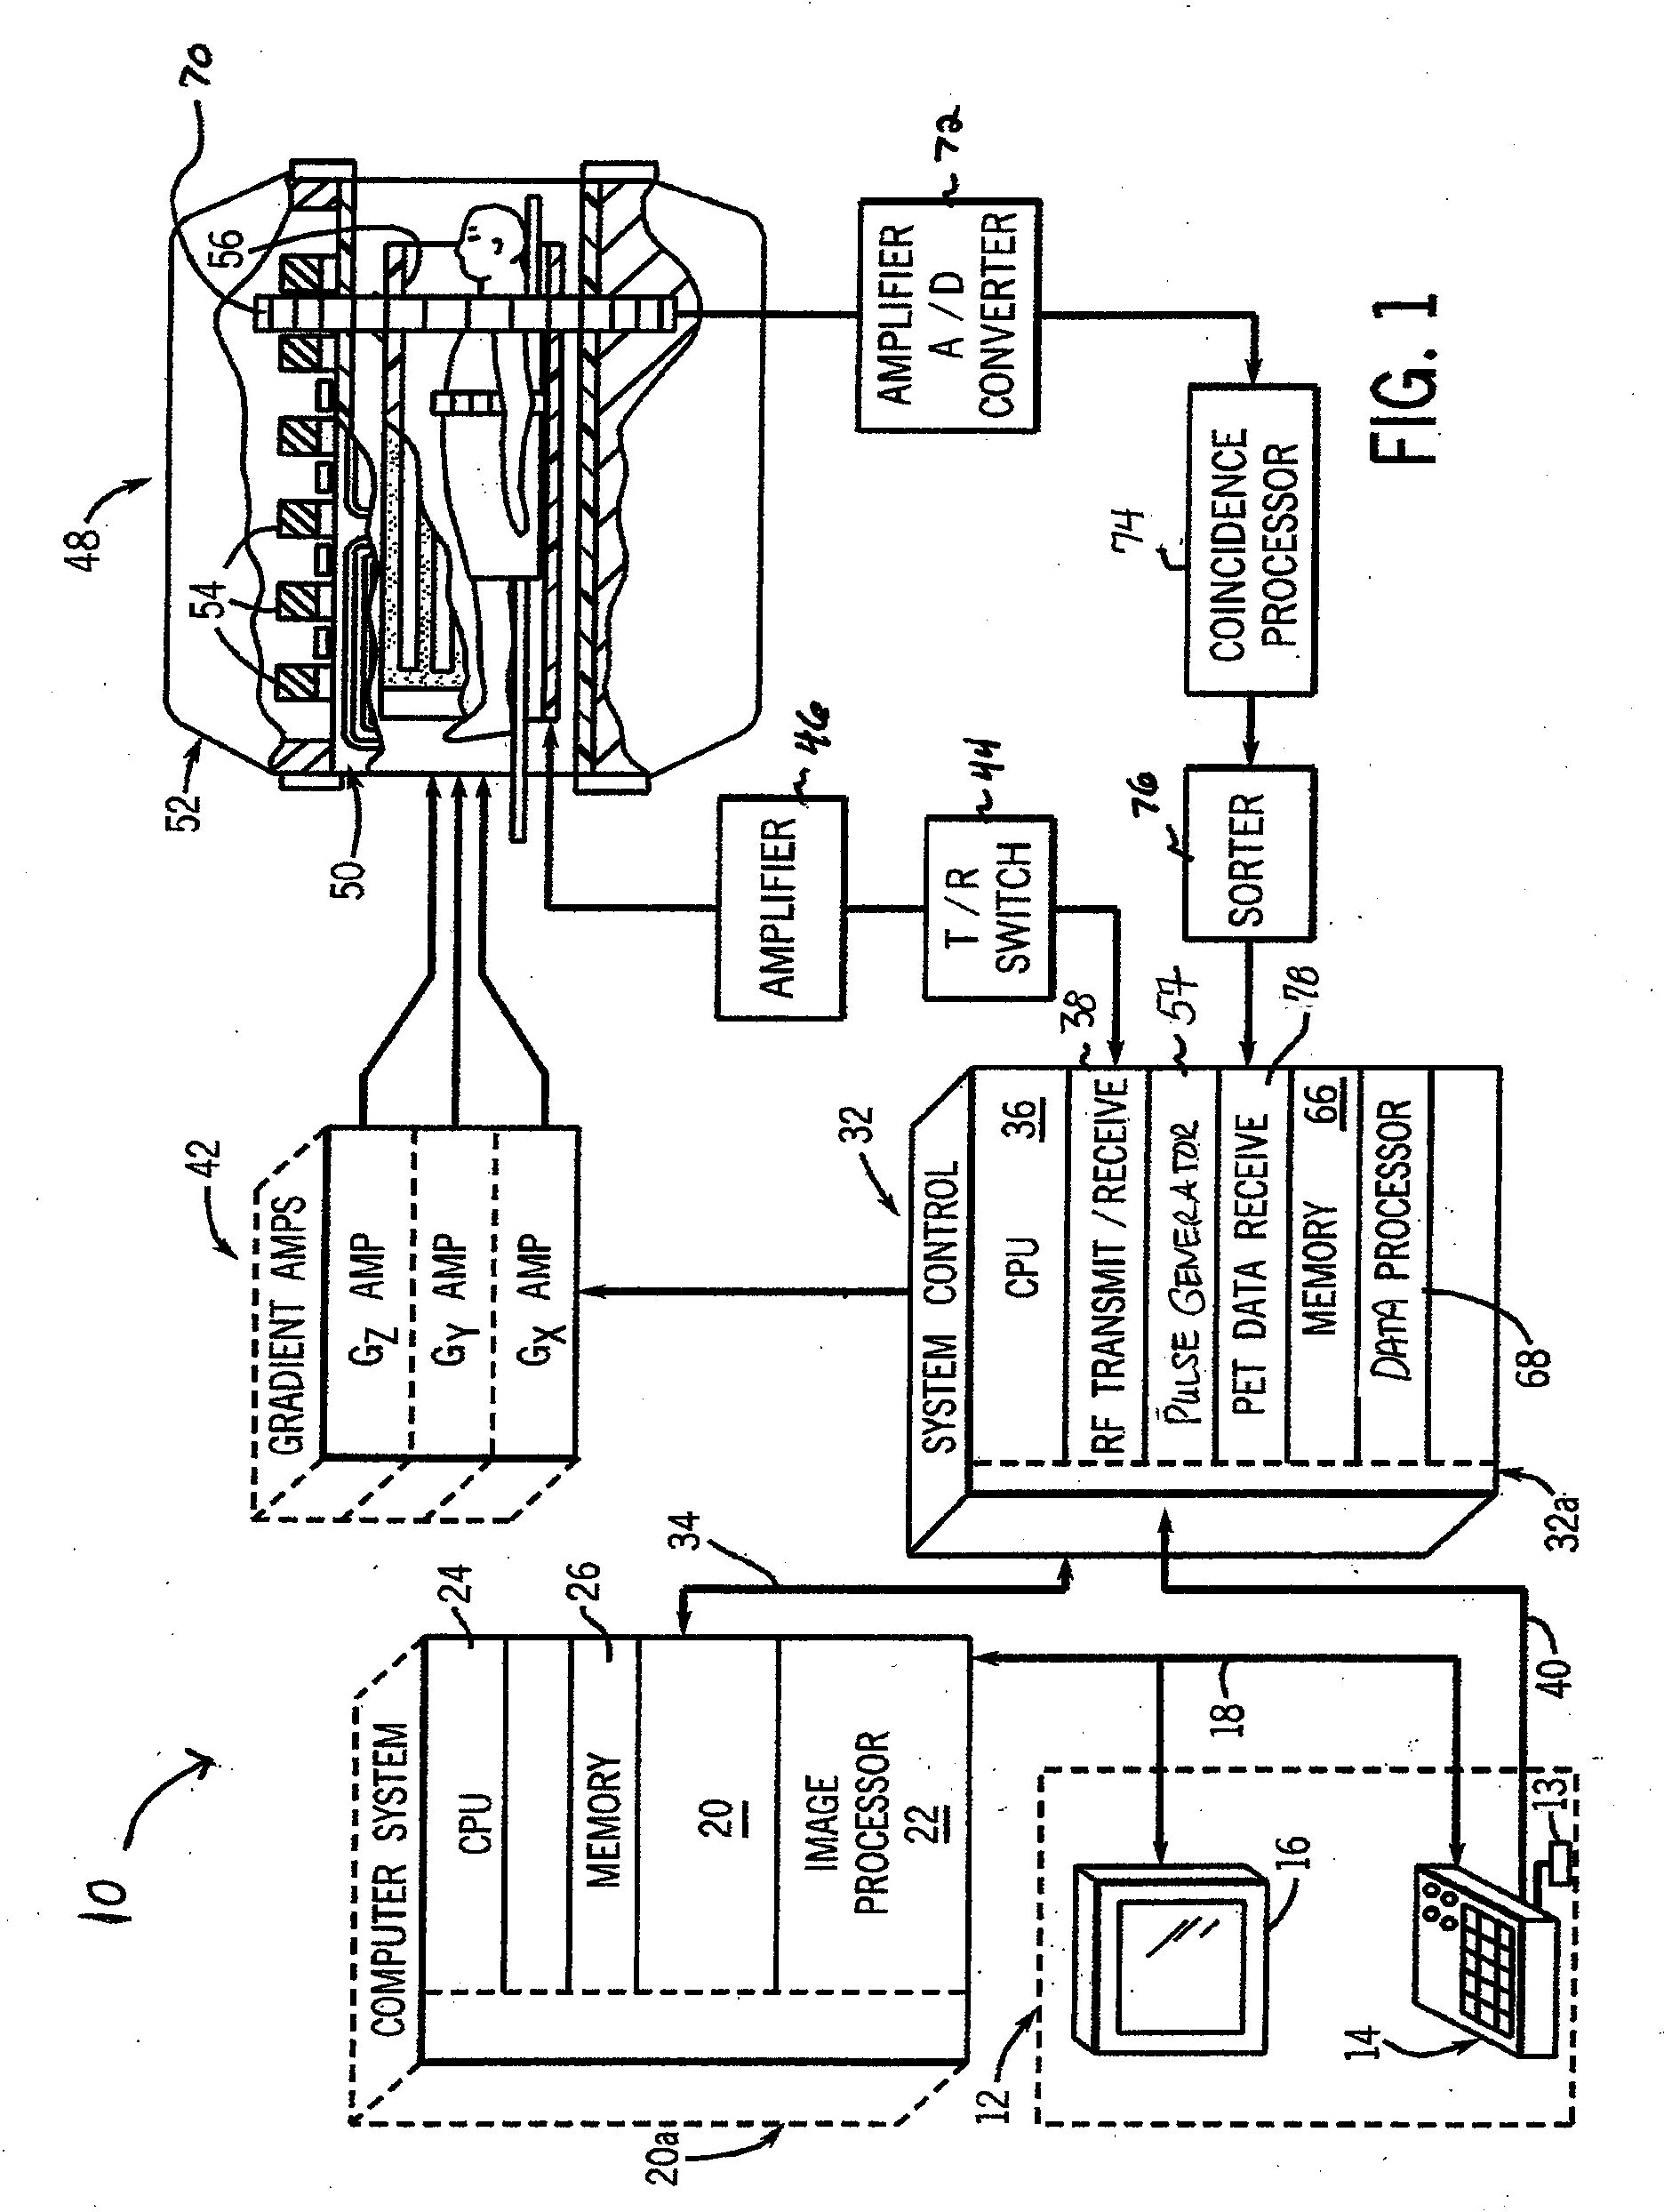 System, method and apparatus for cancer imaging